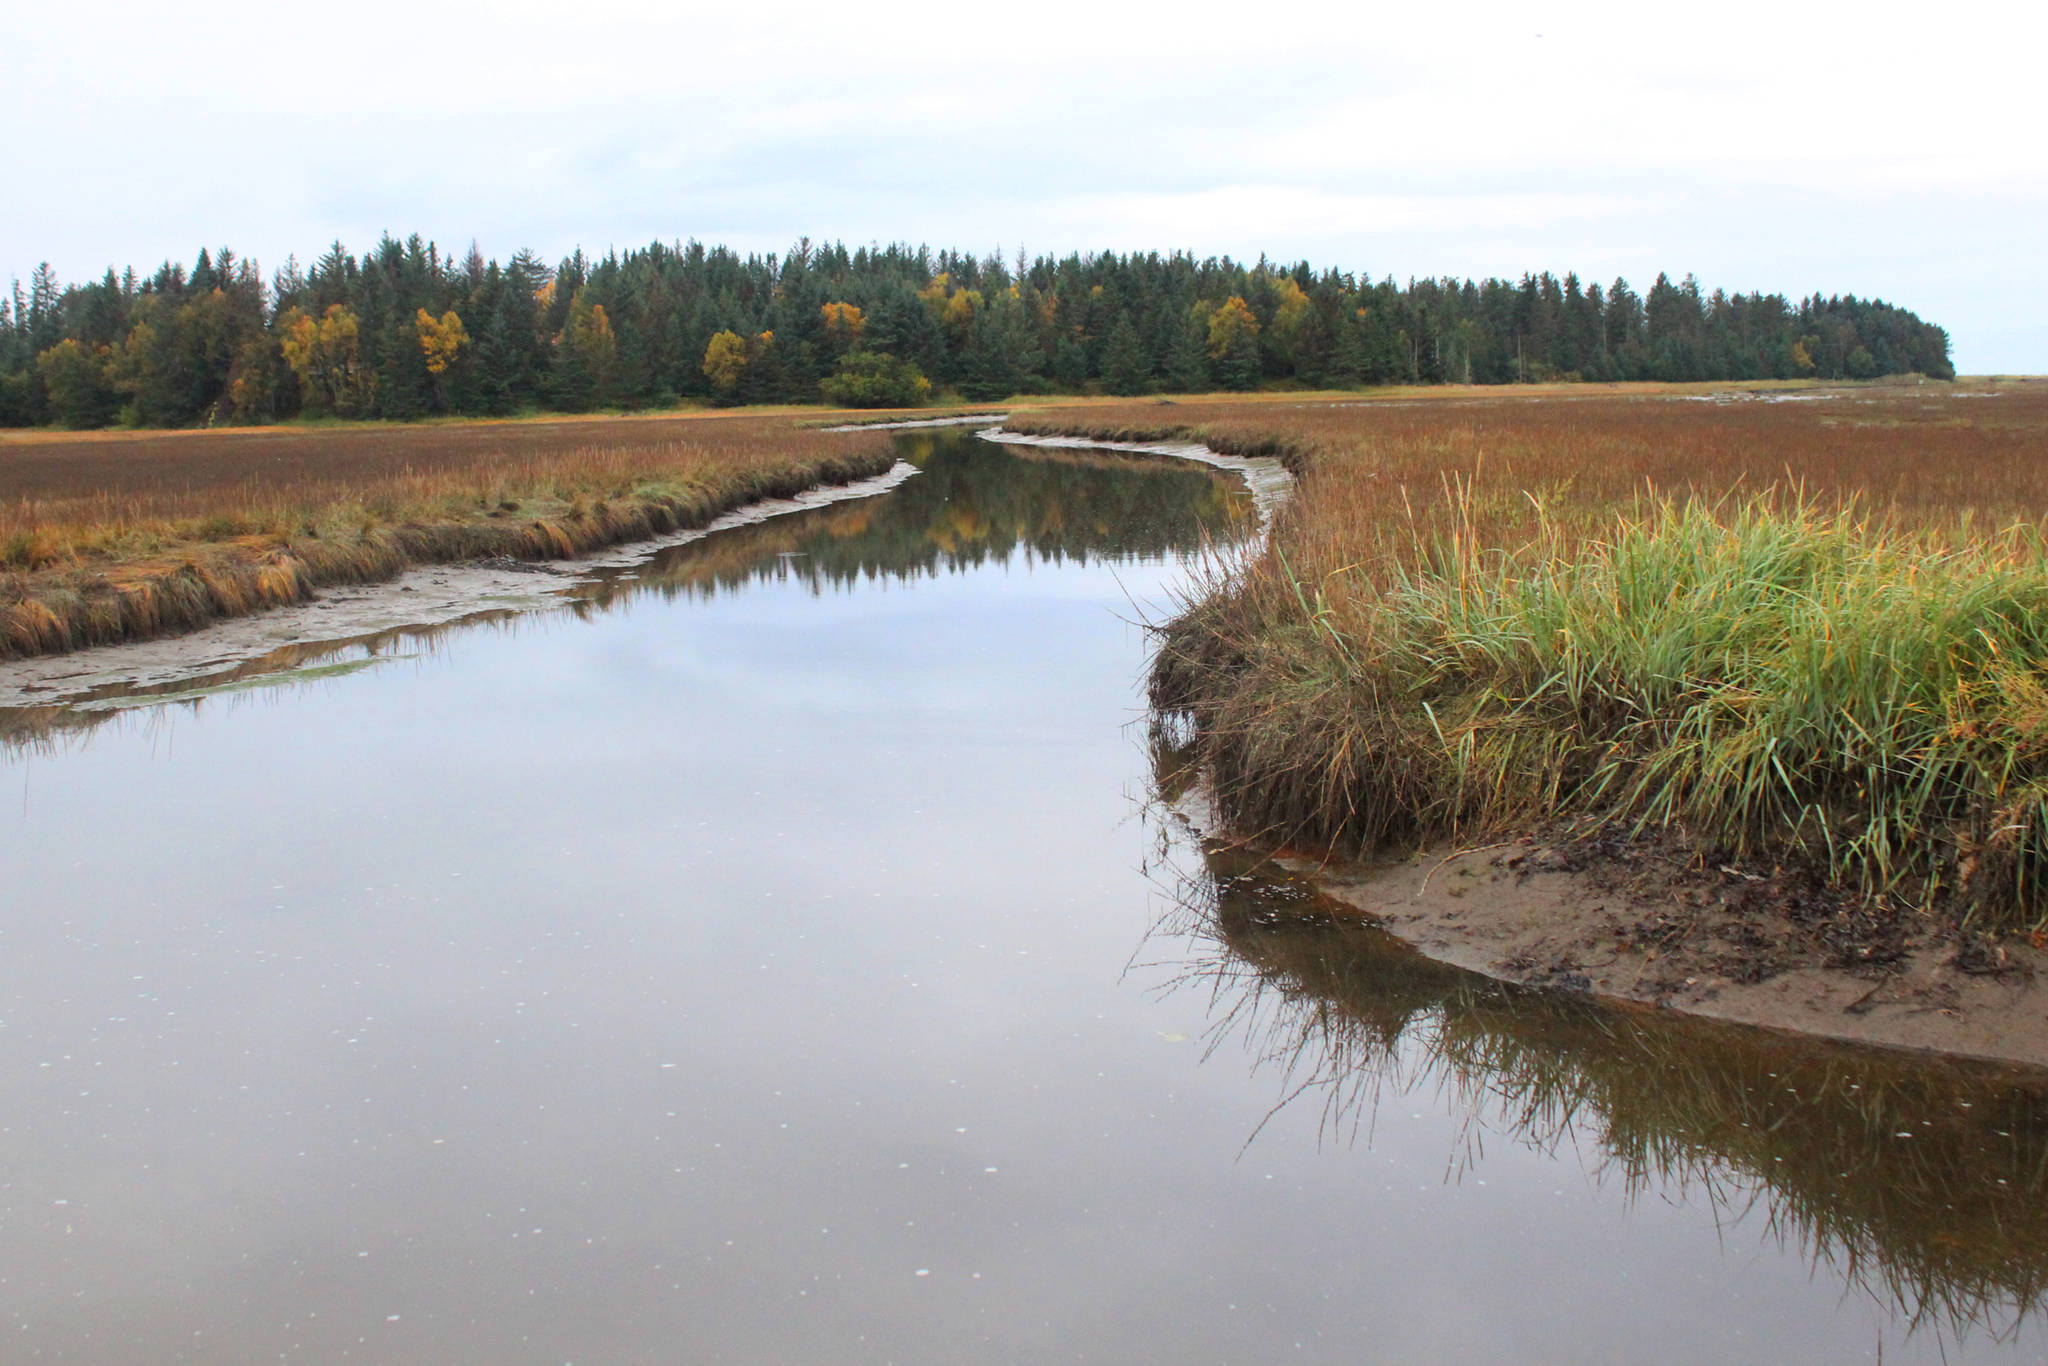 The Beluga Slough, pictured here Thursday, Sept. 28, 2017 in Homer, Alaska, provides myriad functions for the local environment, something students from Paul Banks Elementary learned last Thursday during a field trip there. (Photo by Megan Pacer/Homer News)